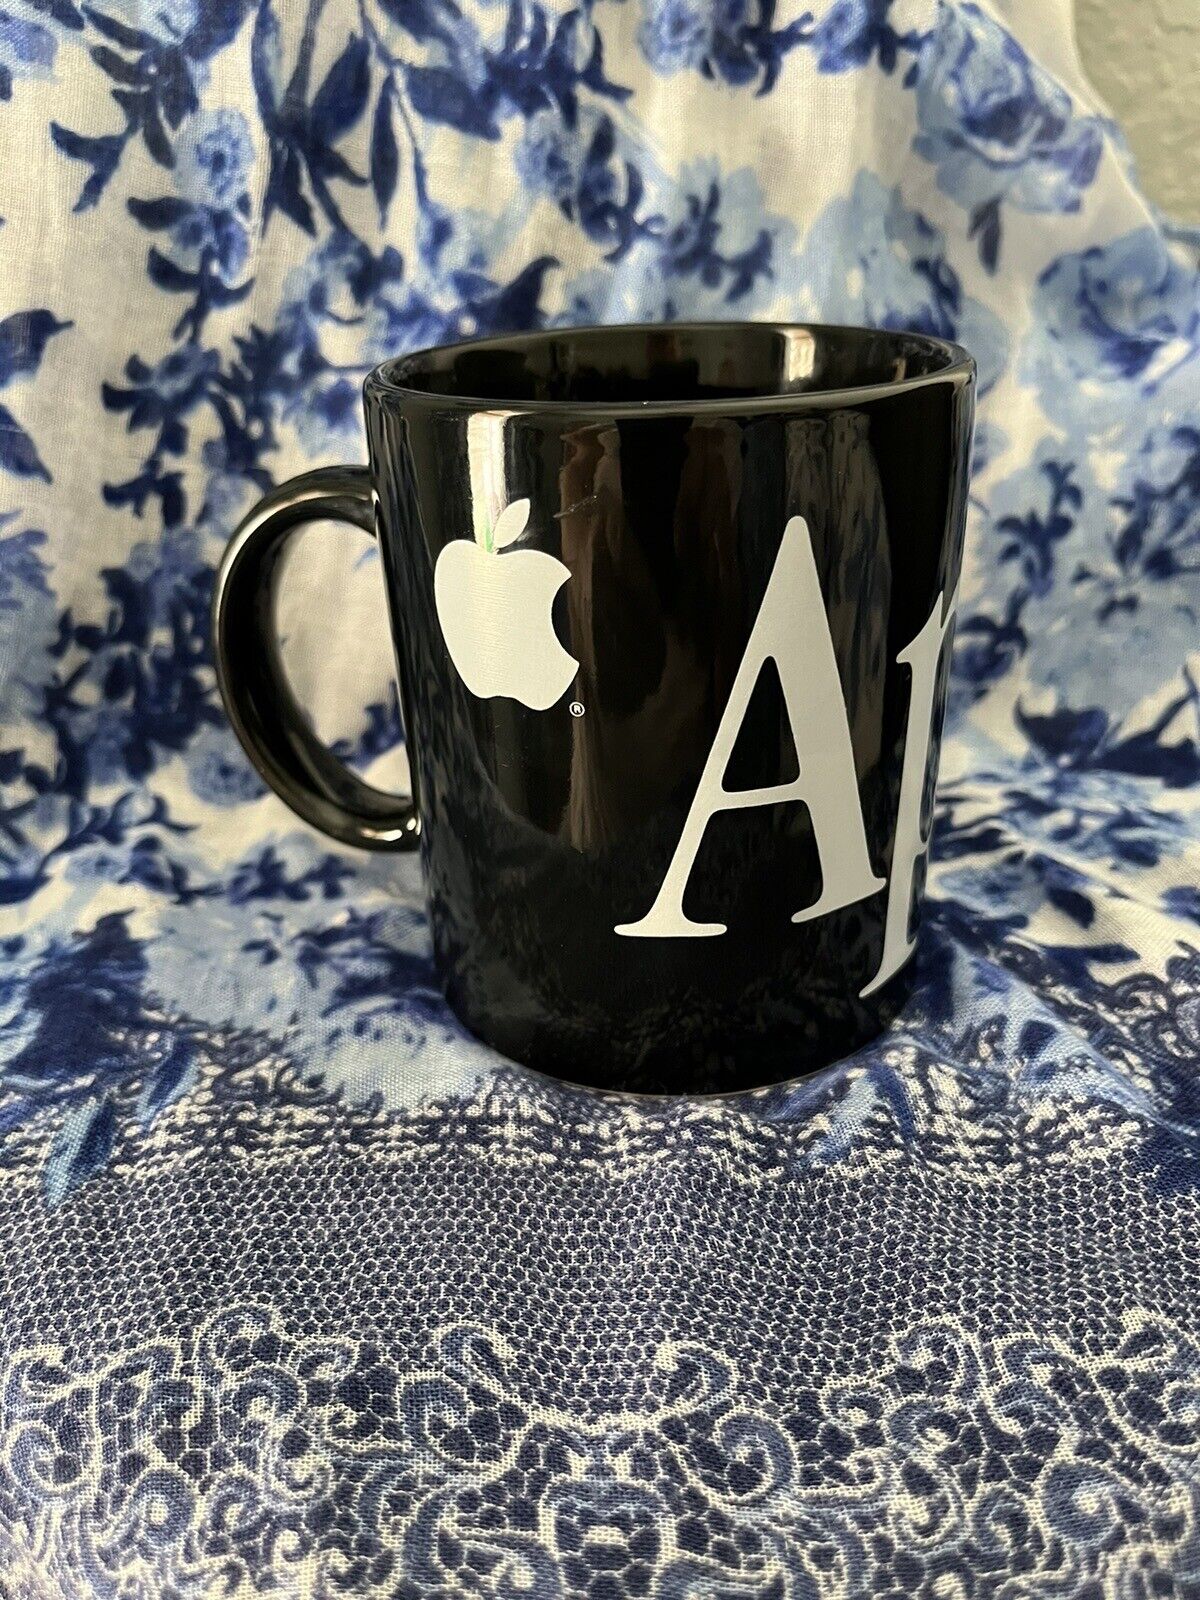 Apple Computer Cup Logo Black and White Wrap-Around Lettering Ceramic 1990's